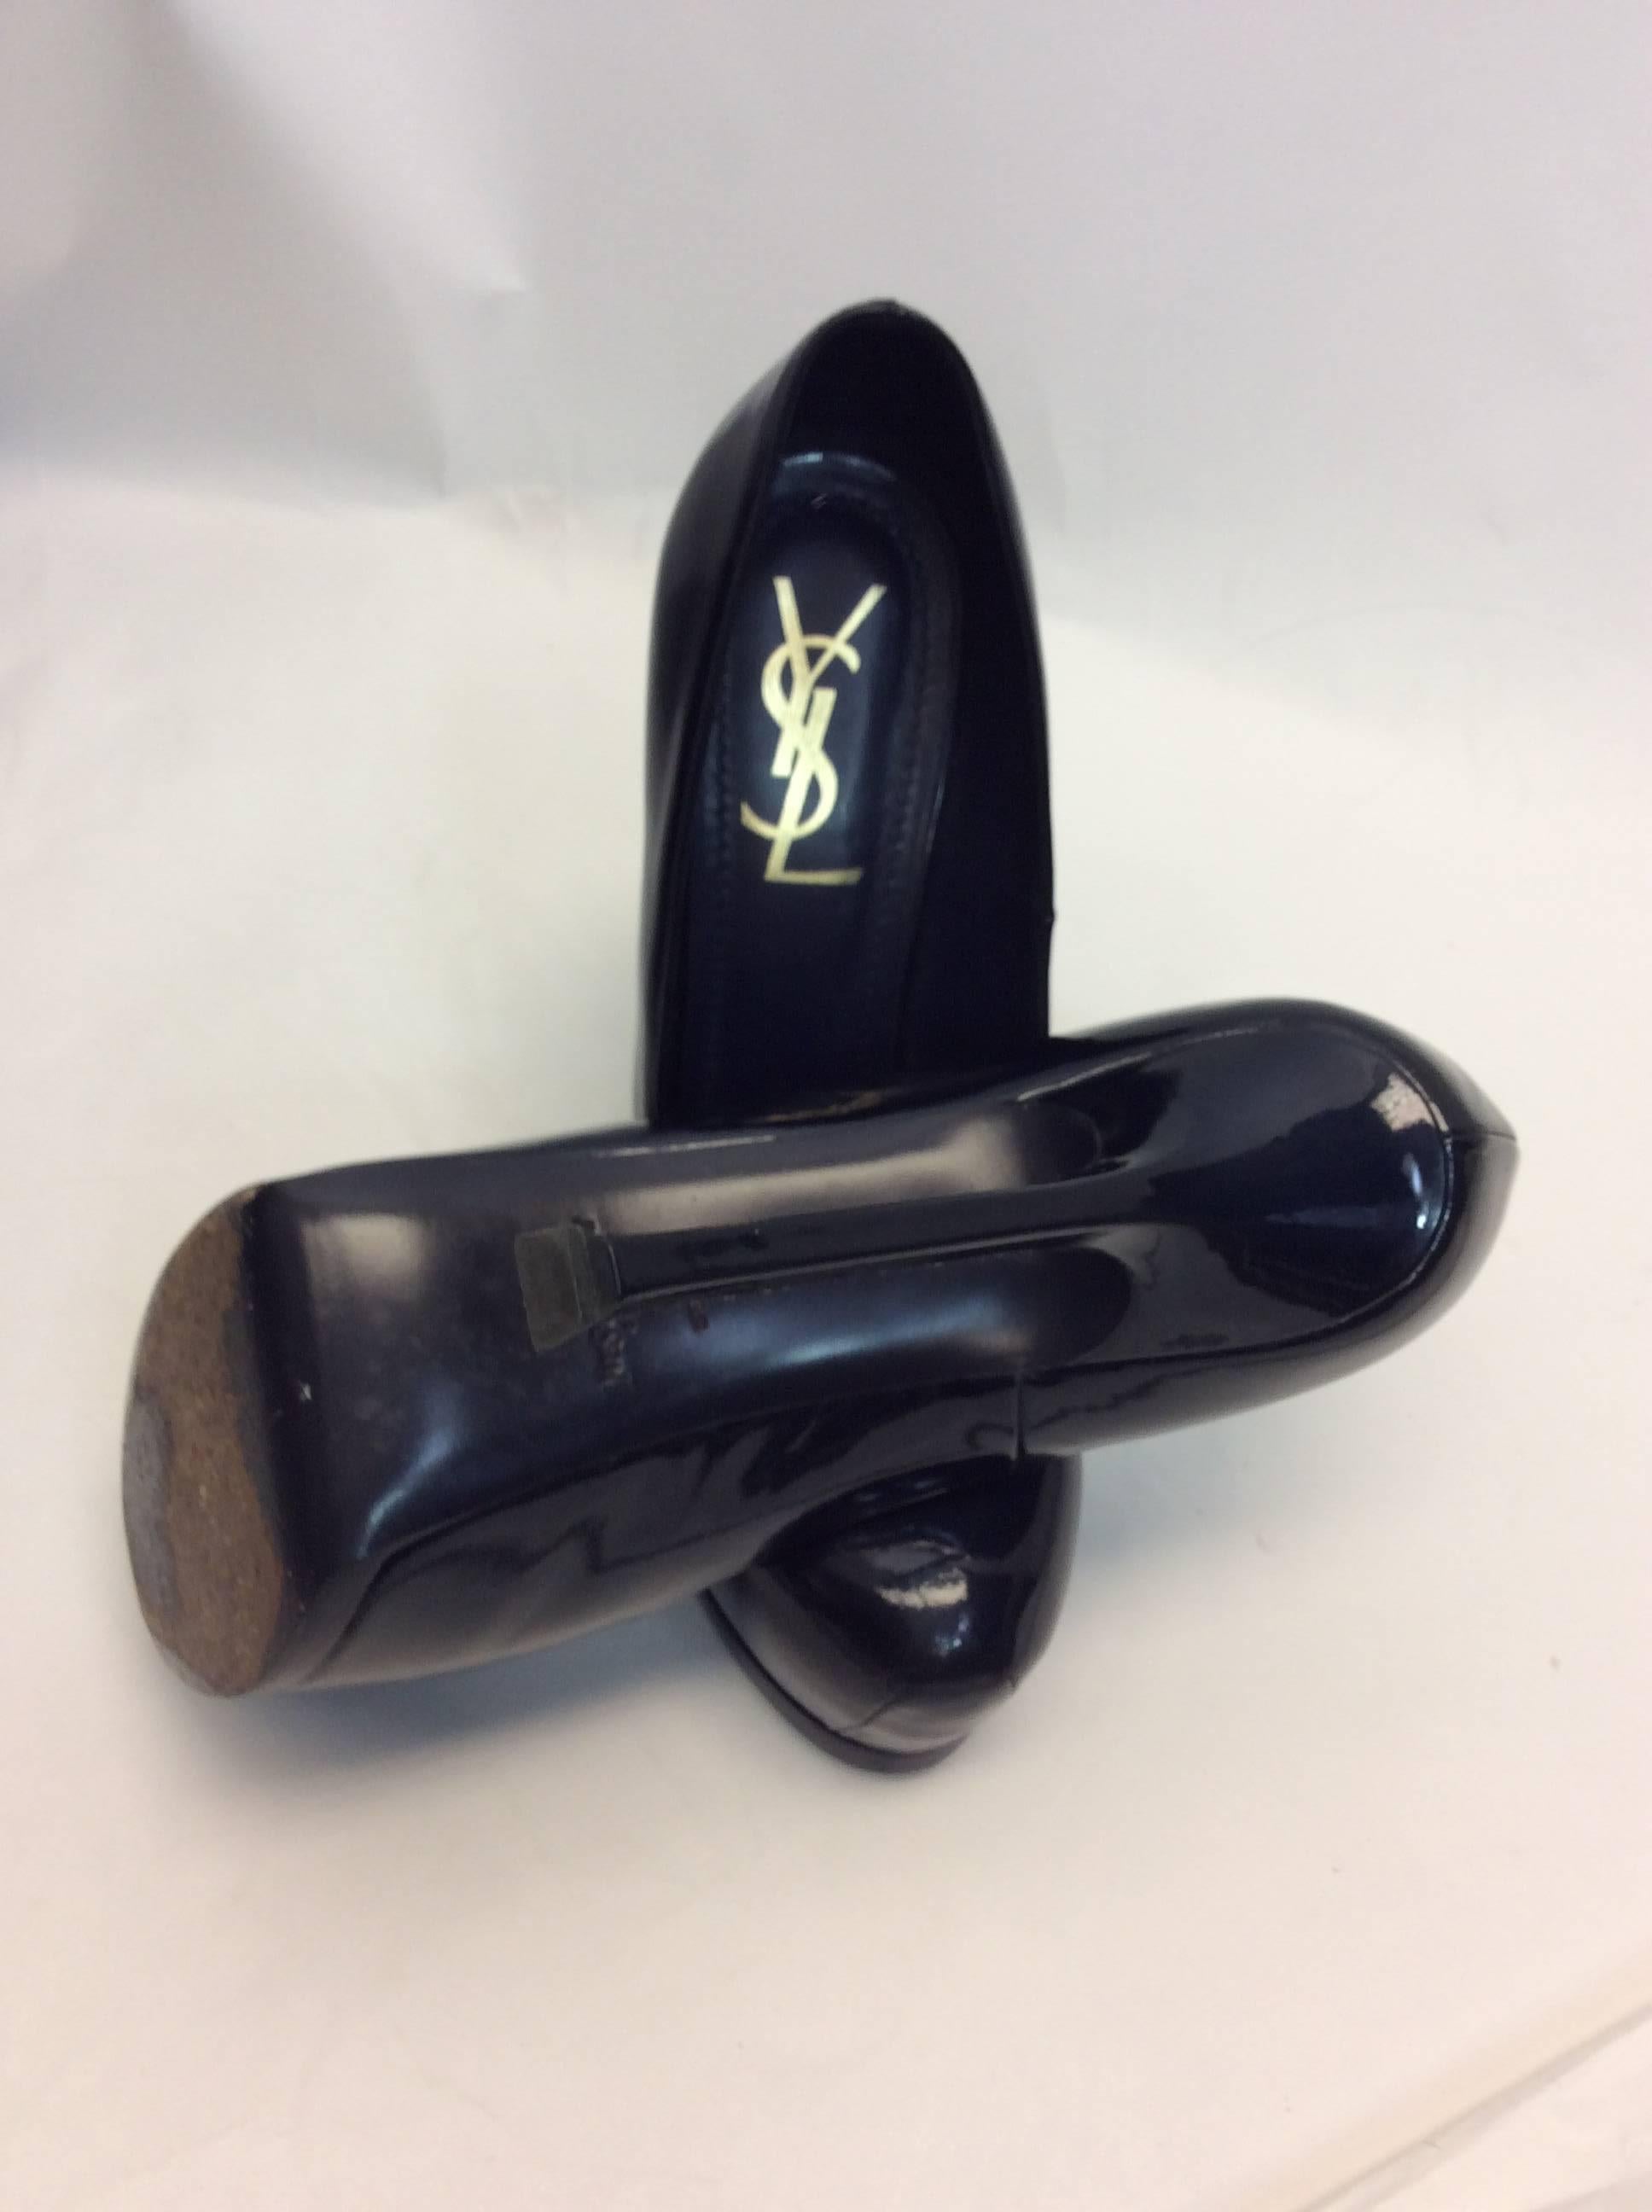 YSL Navy Patent Leather Pumps  In Excellent Condition For Sale In Narberth, PA